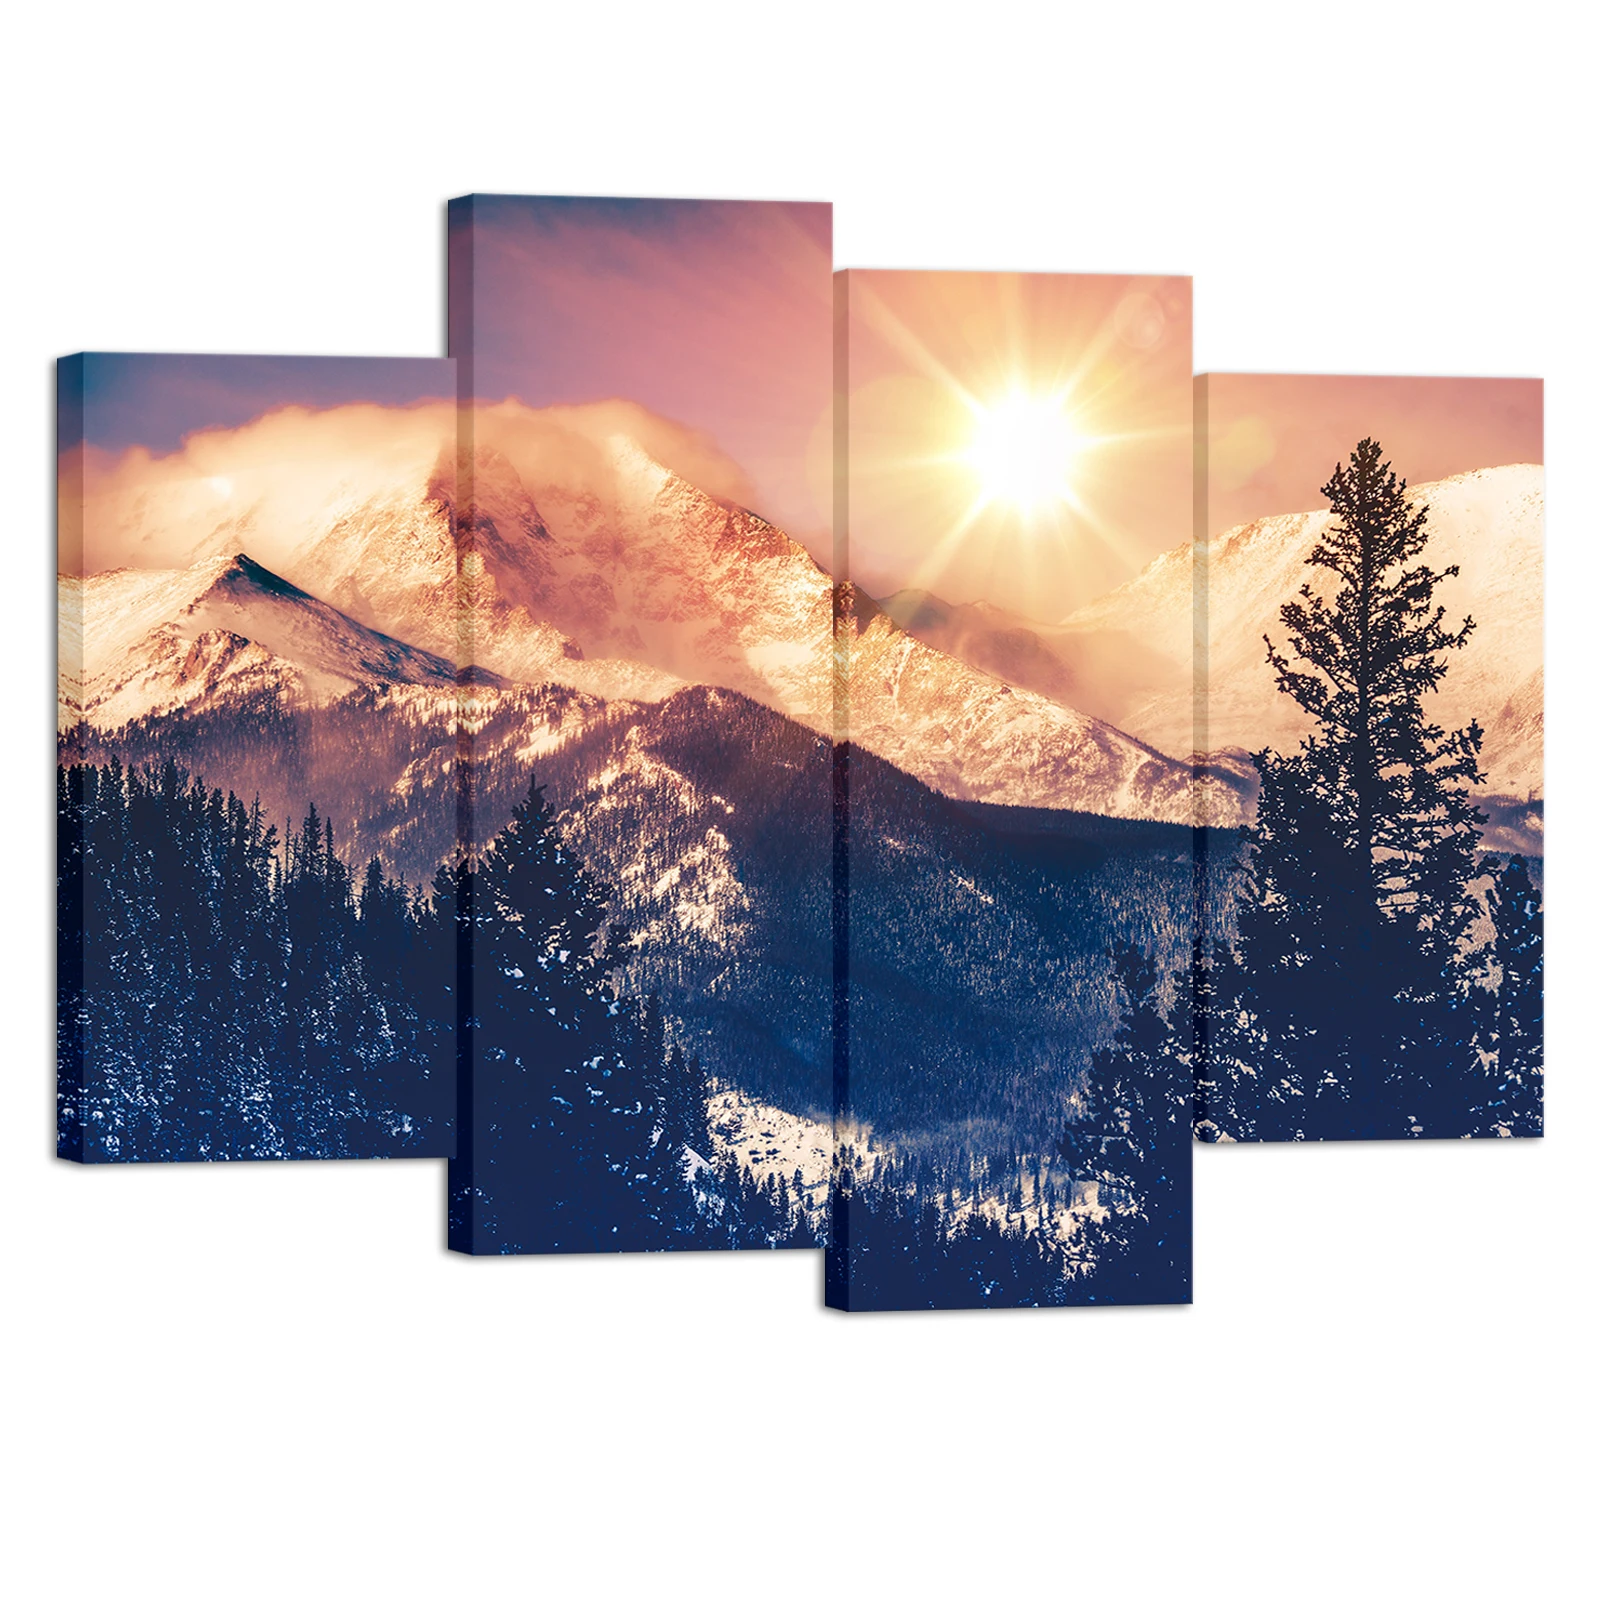 

4 Pieces Poster Wall Art Mountain Forest Print Canvas Painting Gold Sunset Modern Style Pictures Living Room Wall Decor